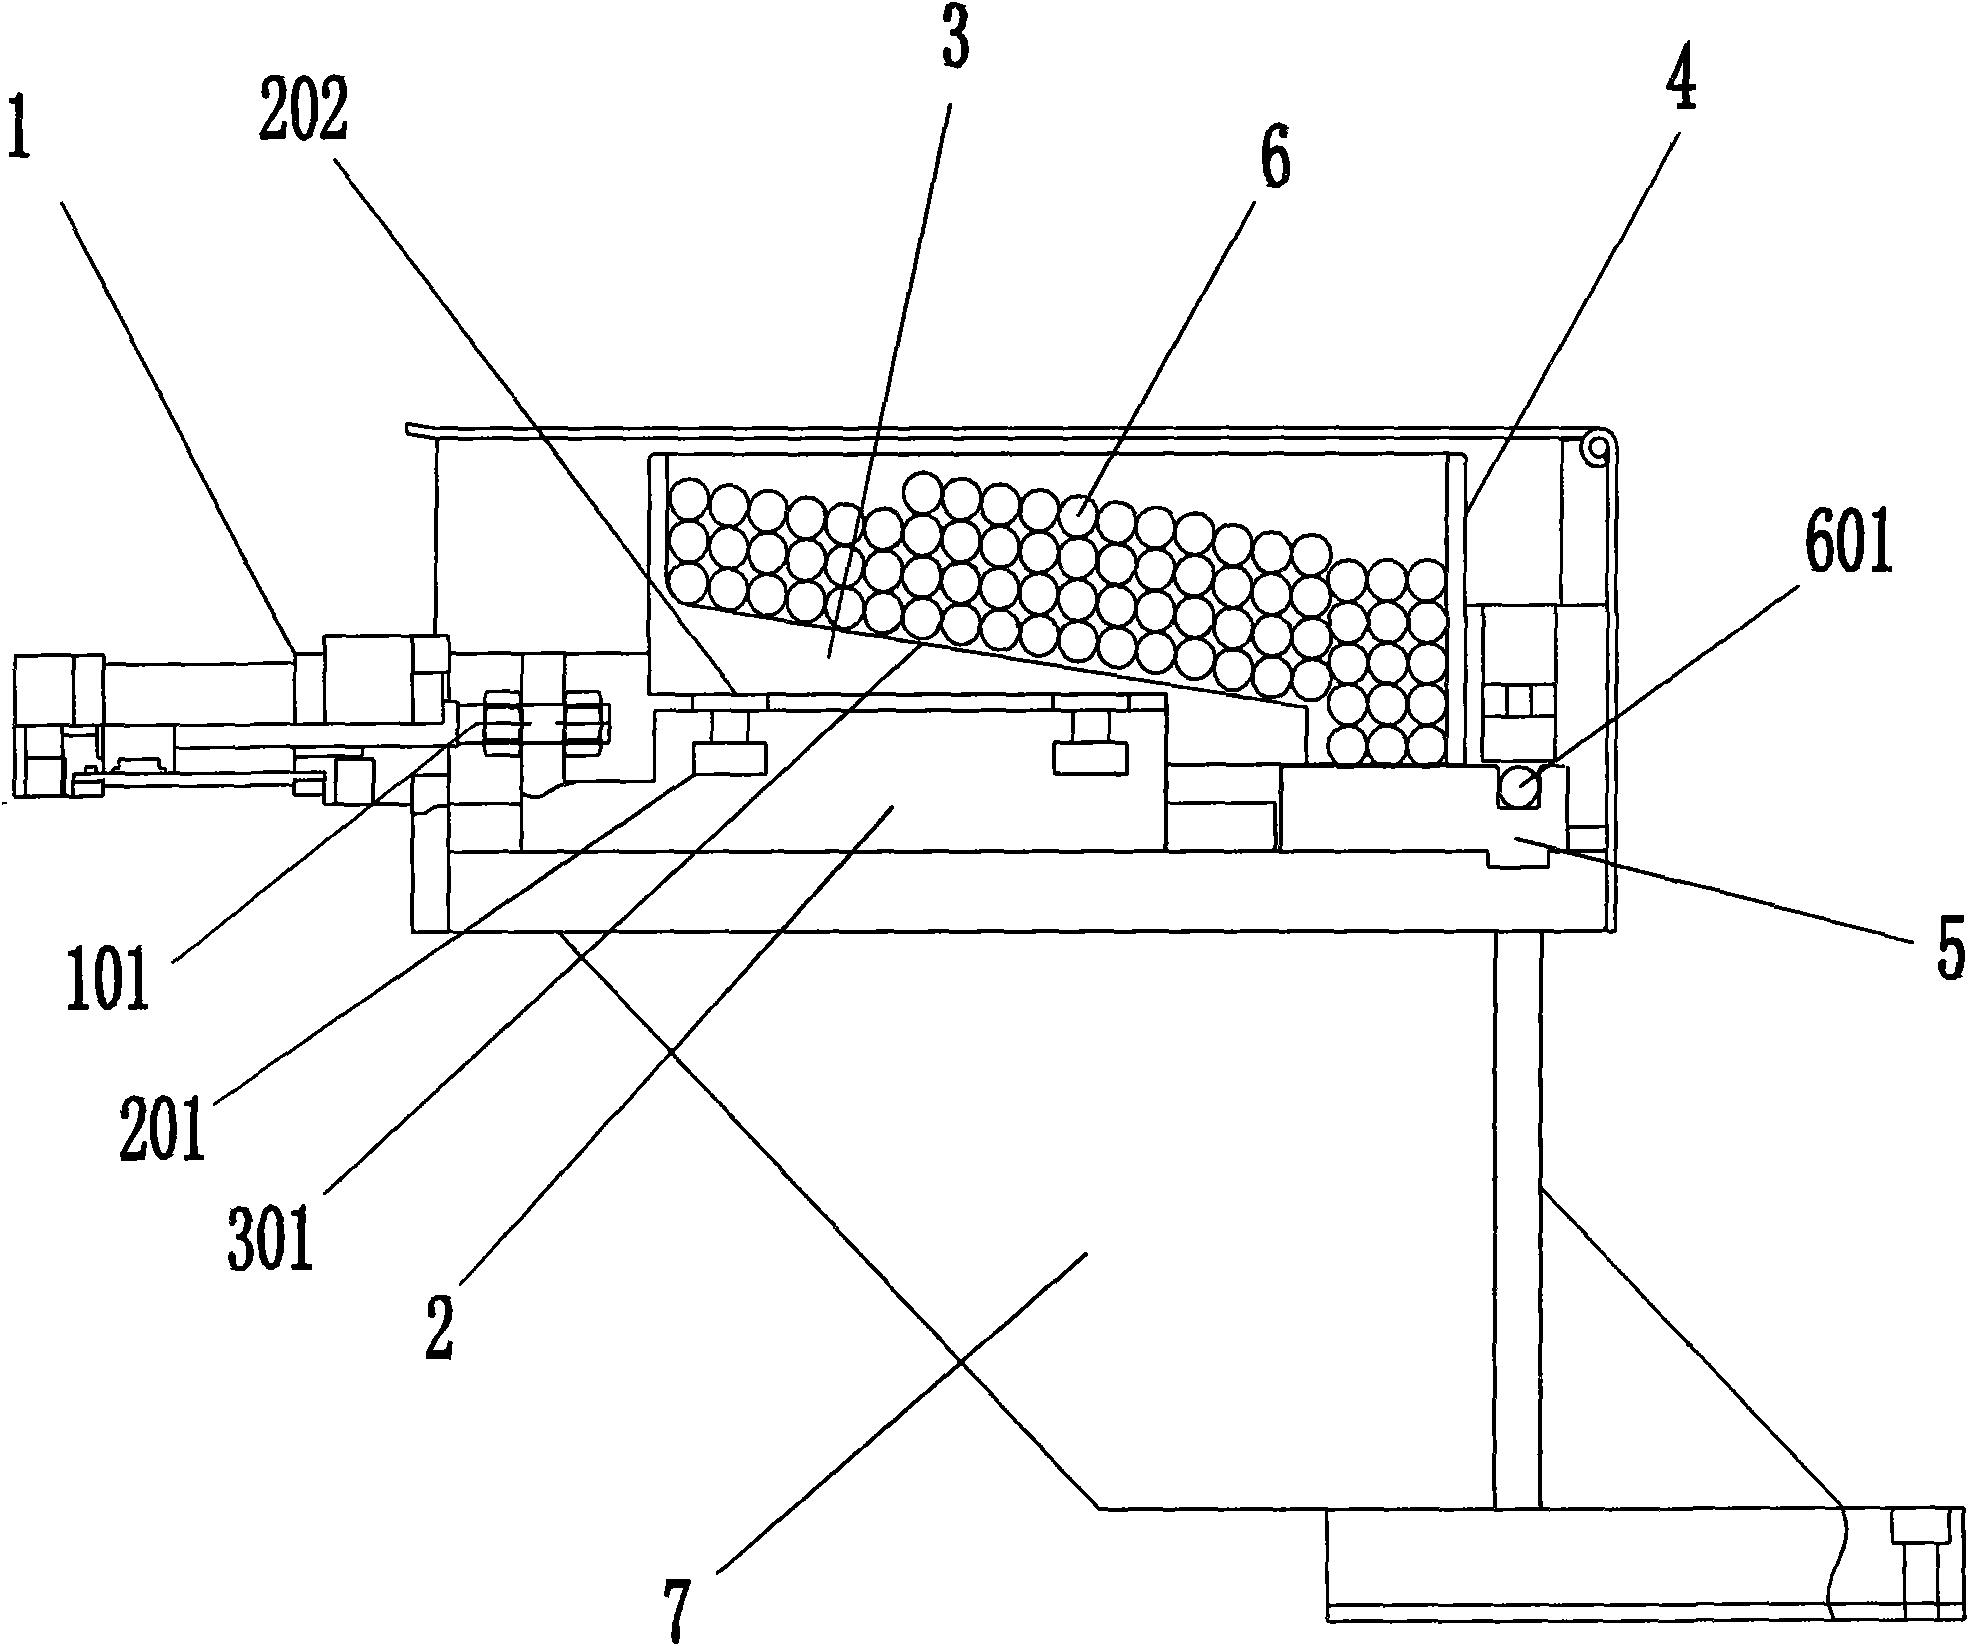 Automatic feed mechanism of numeric-control drill tip grinder